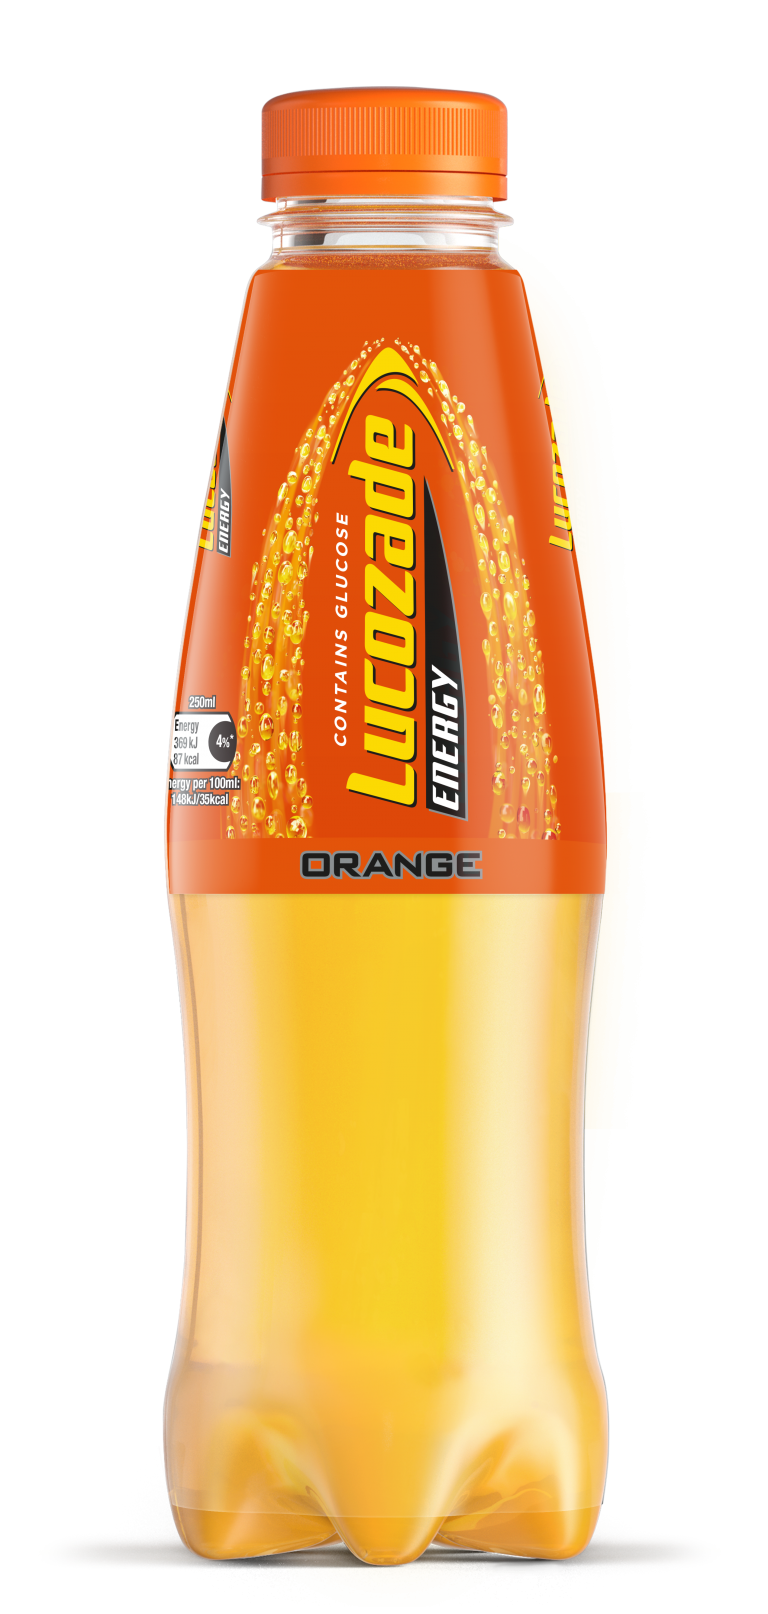 Lucozade Energy launches bold new look and taste across core range